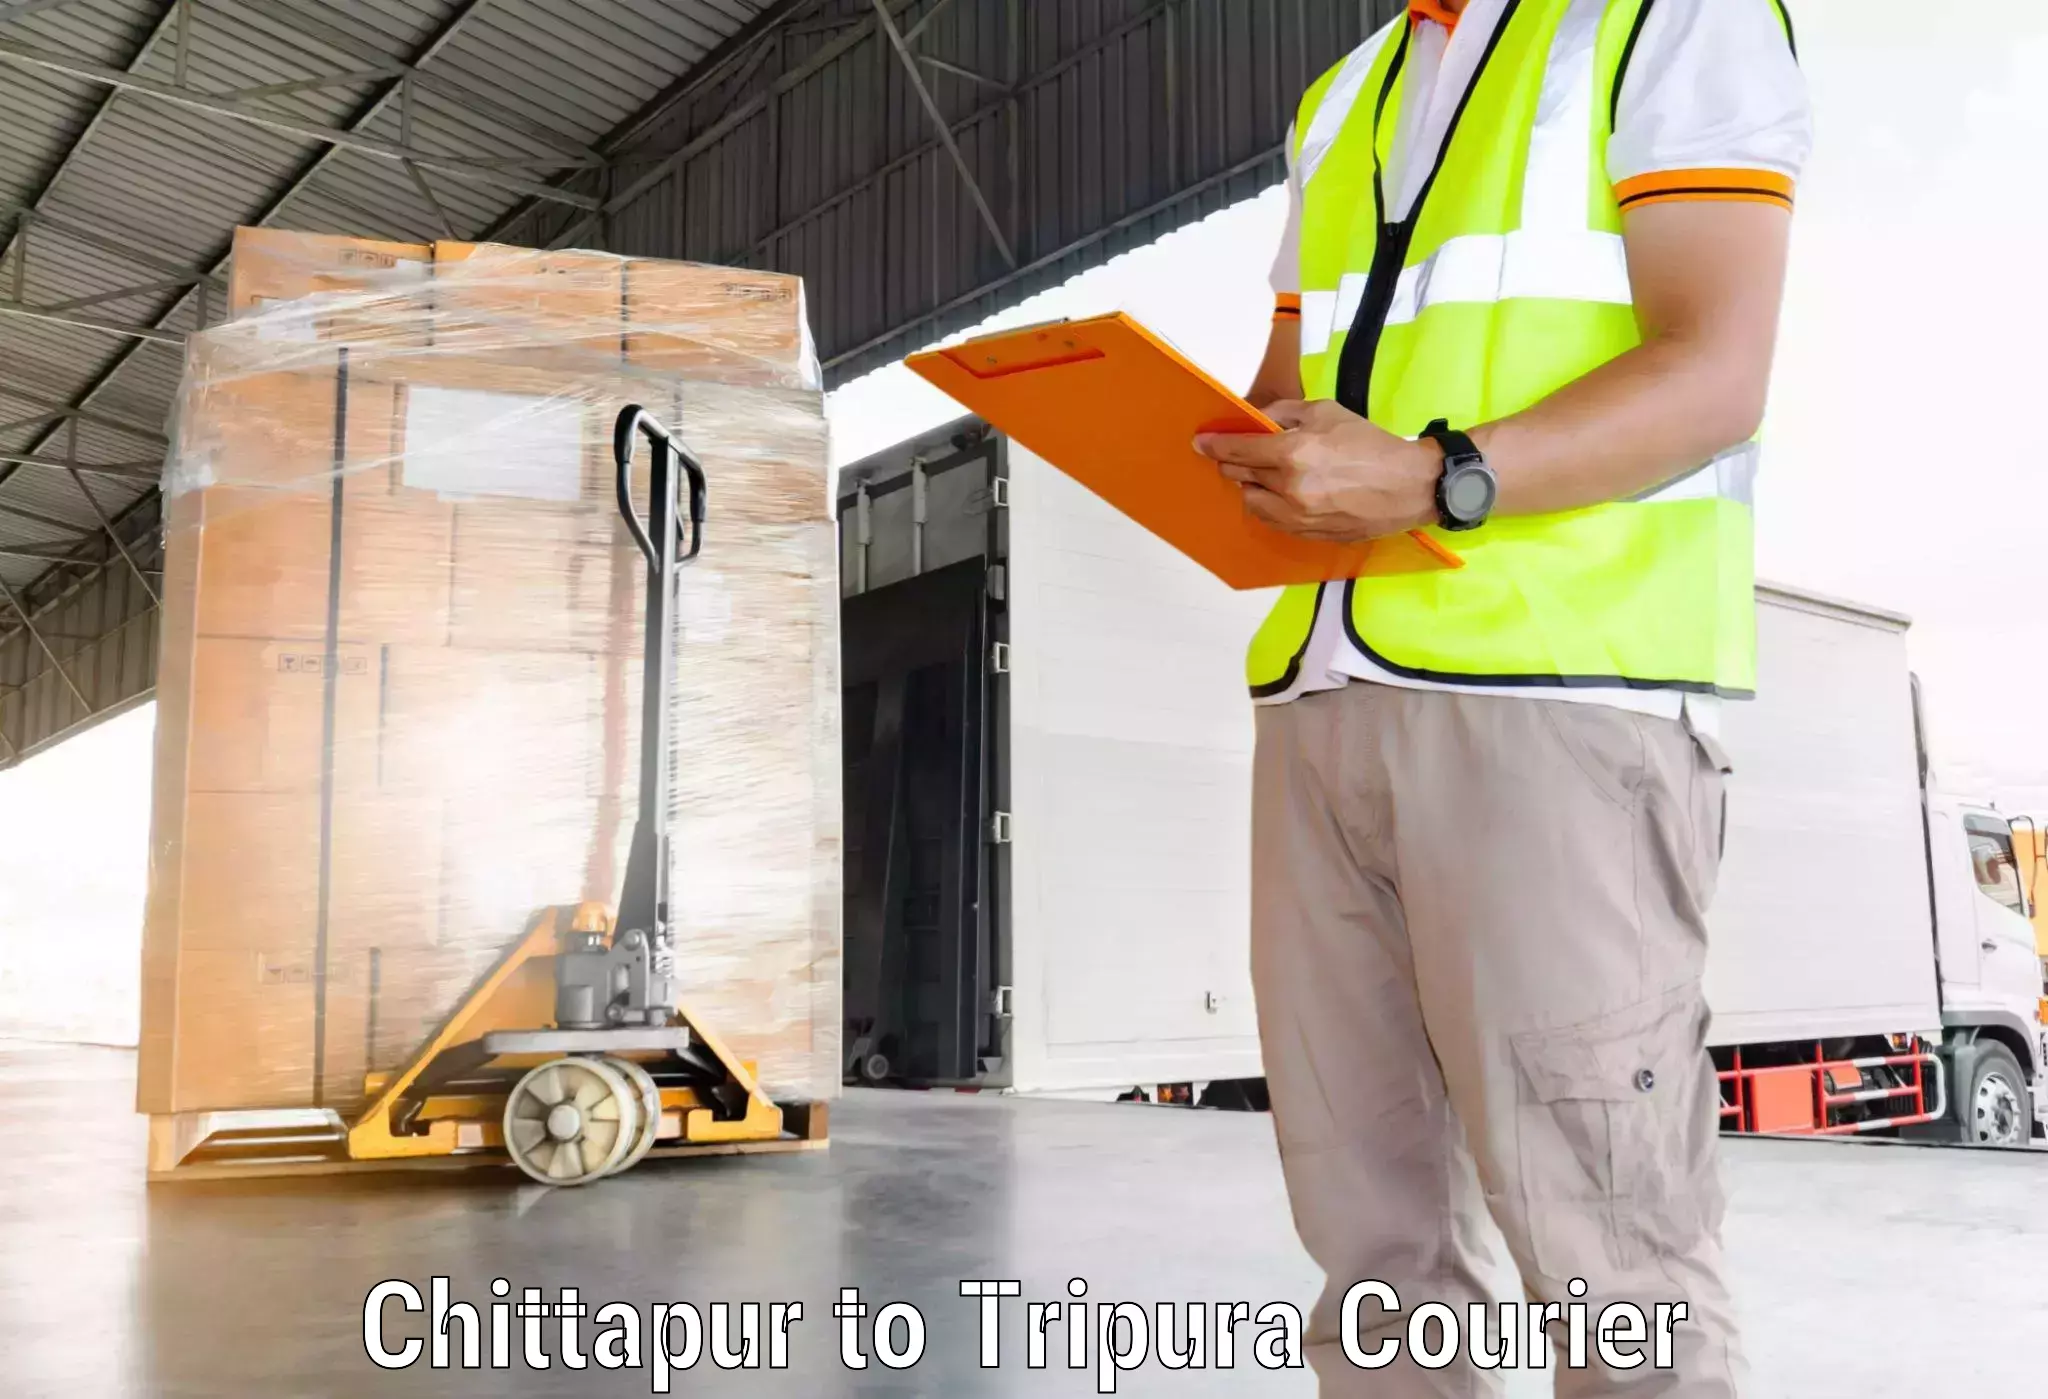 Delivery service partnership Chittapur to Dharmanagar